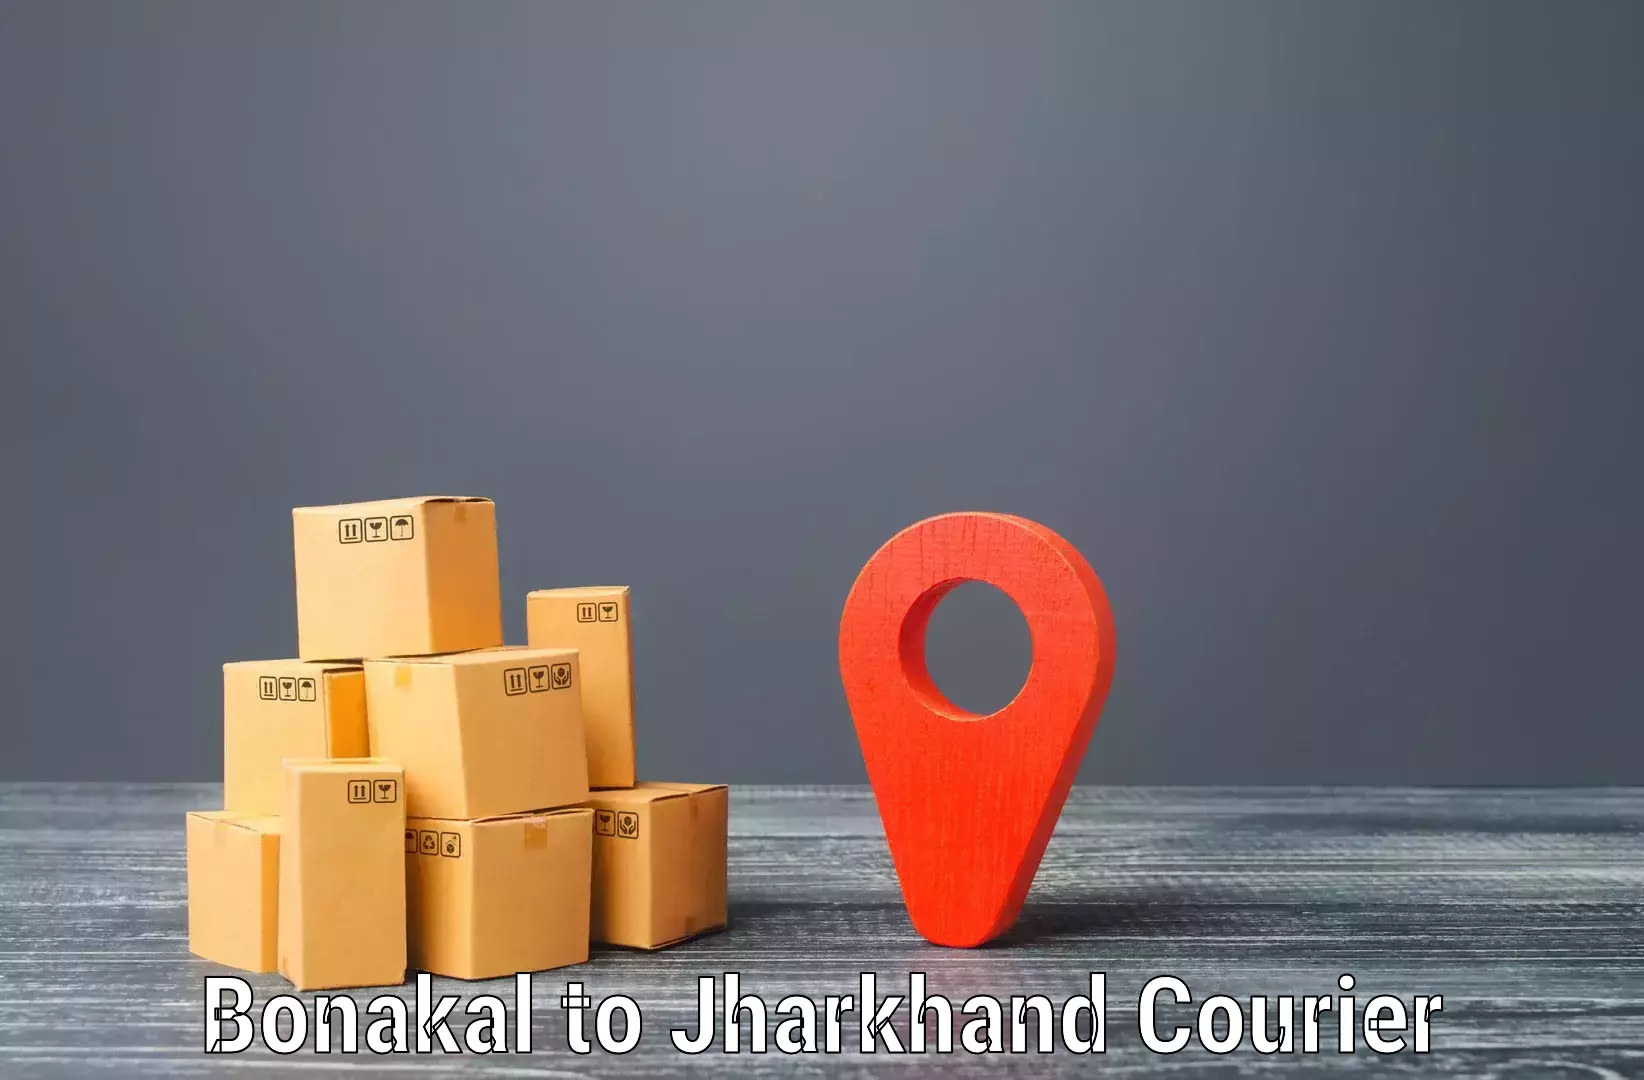 Customizable delivery plans Bonakal to Ramgarh